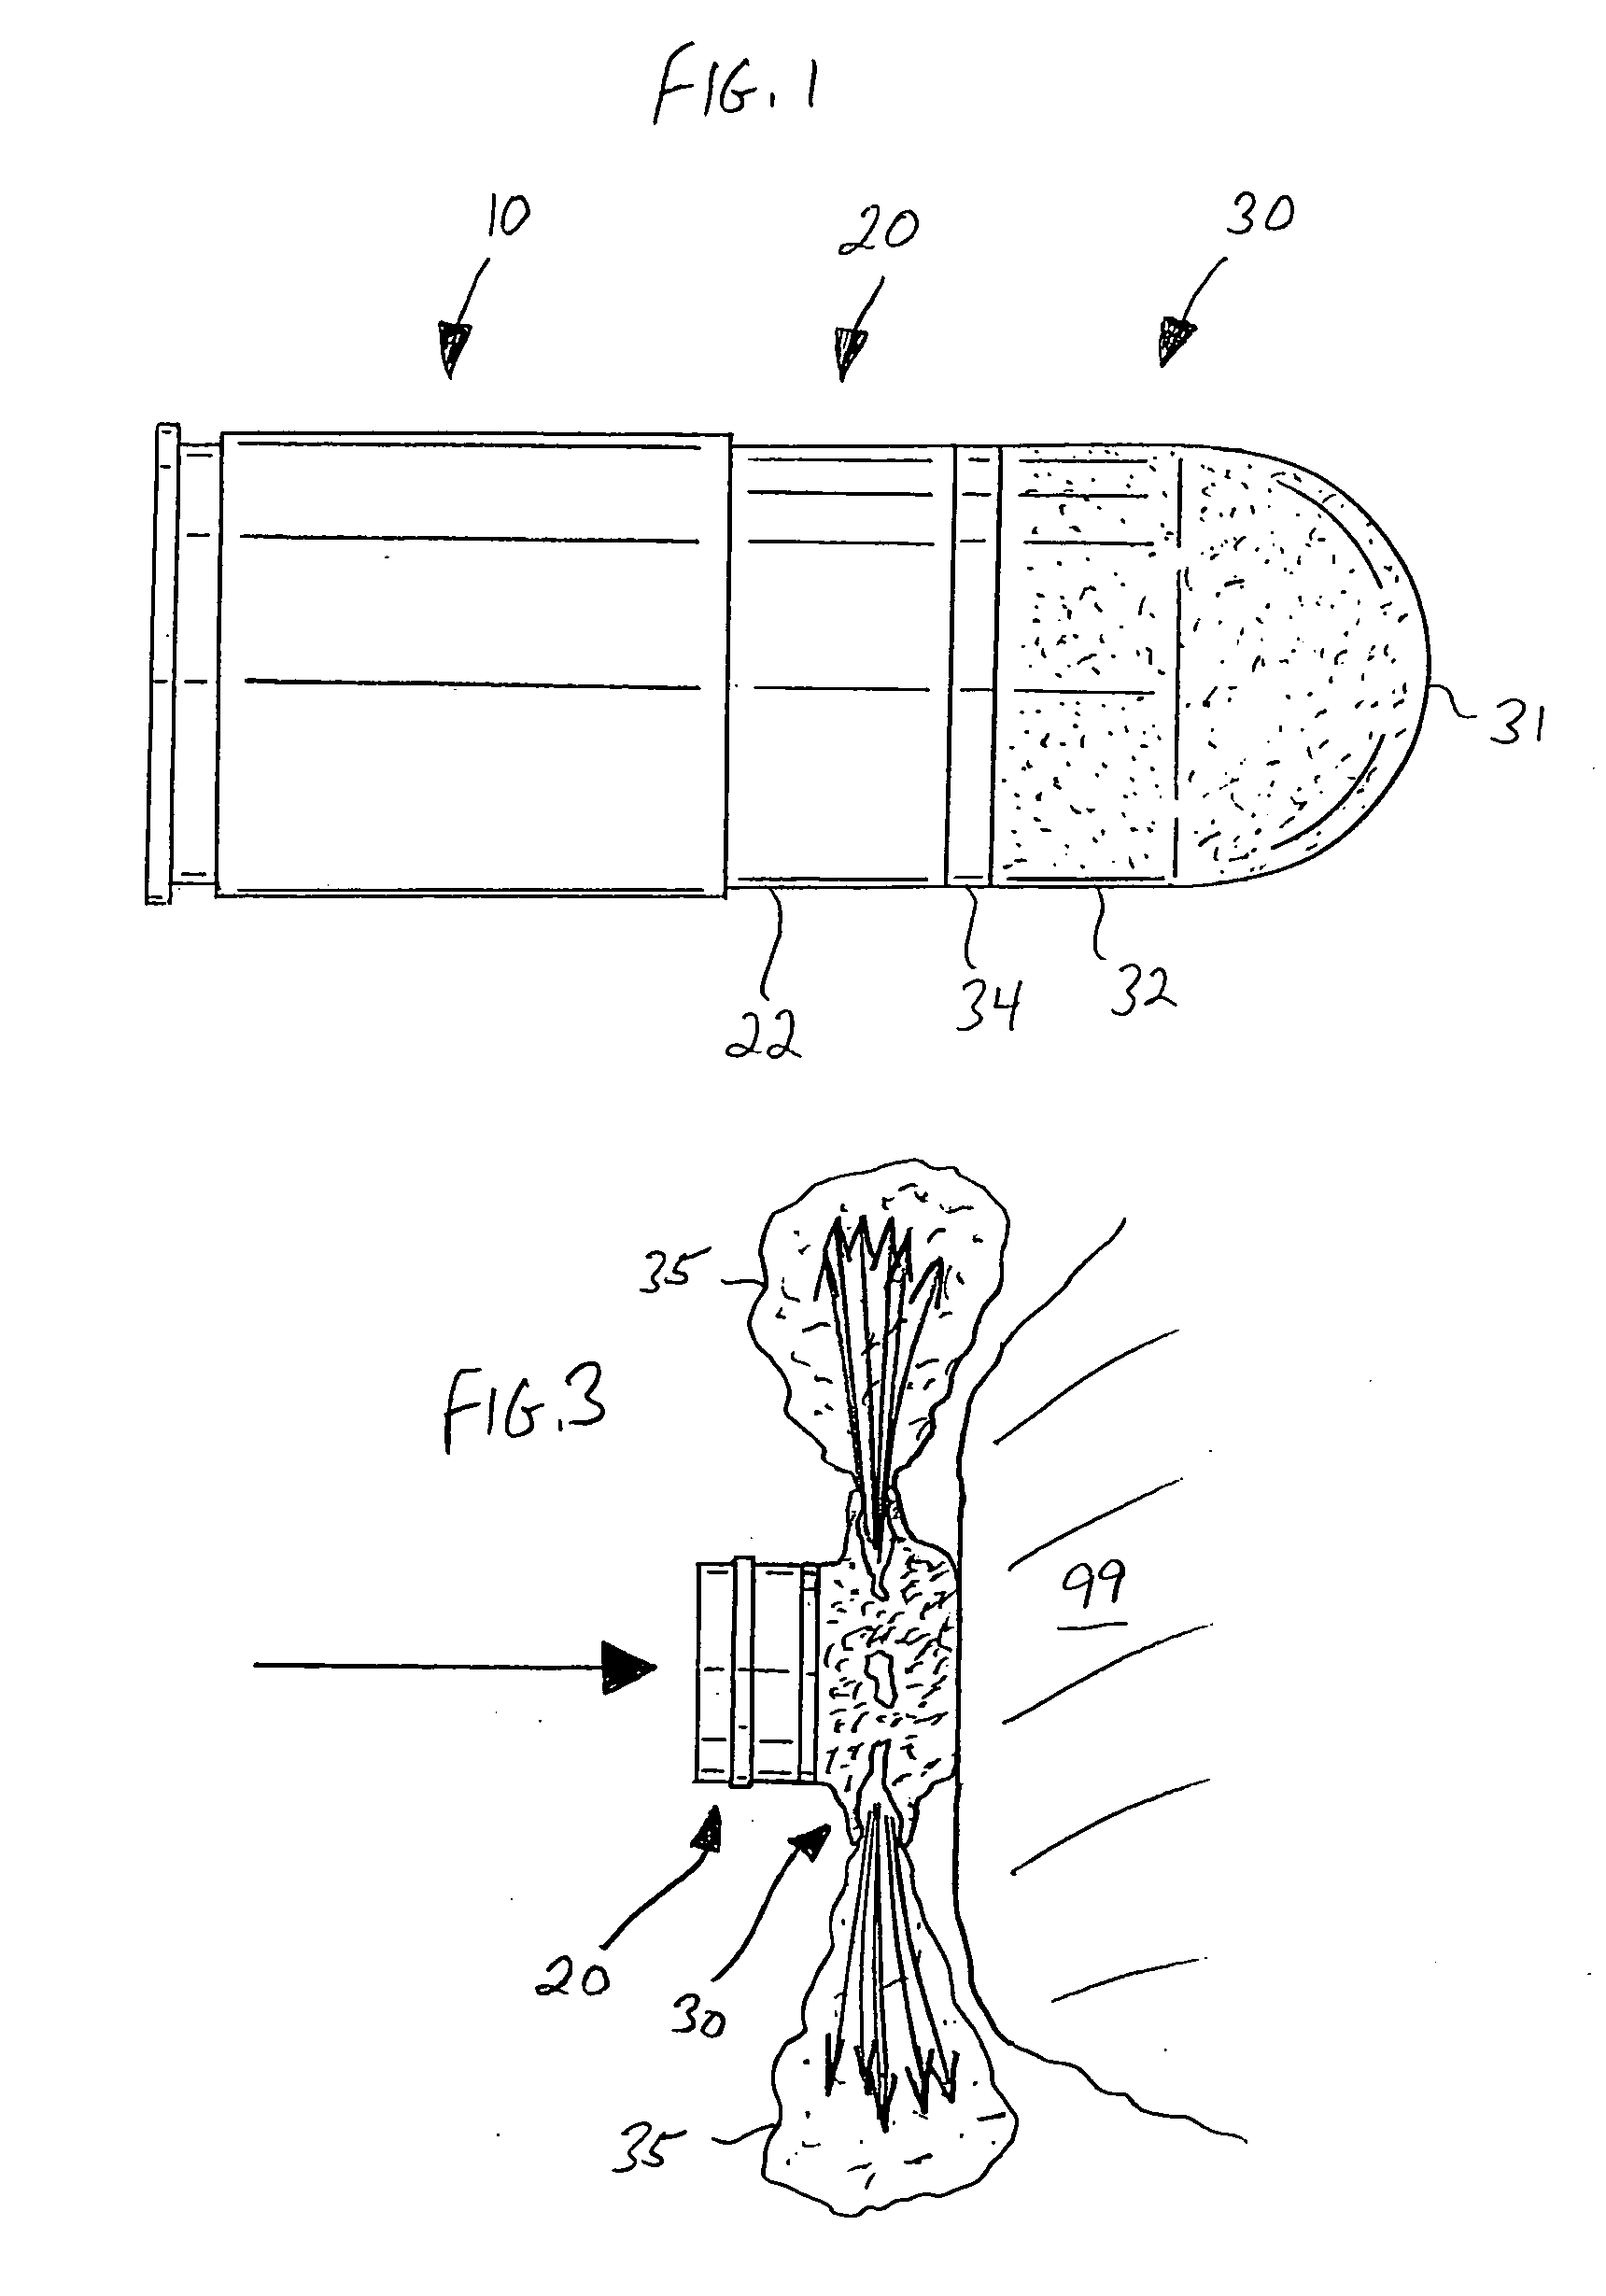 Frangible non-lethal projectile